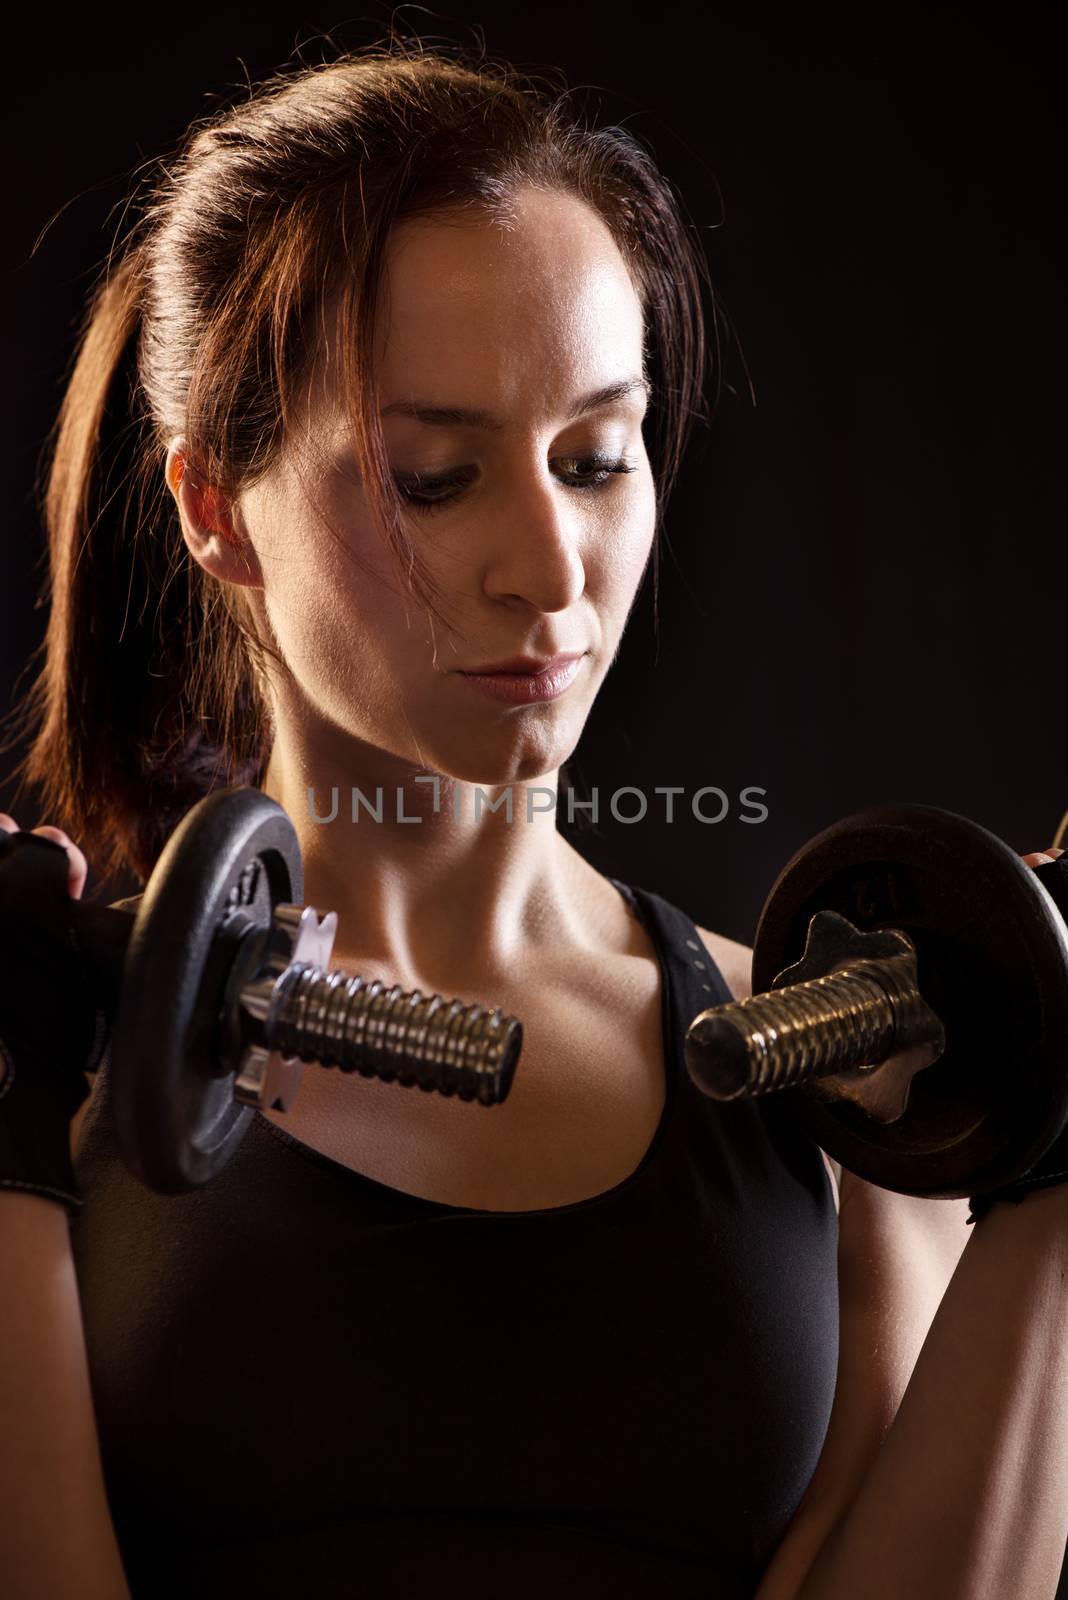 Portrait of a beautiful woman exercising with dumbbells on black background.